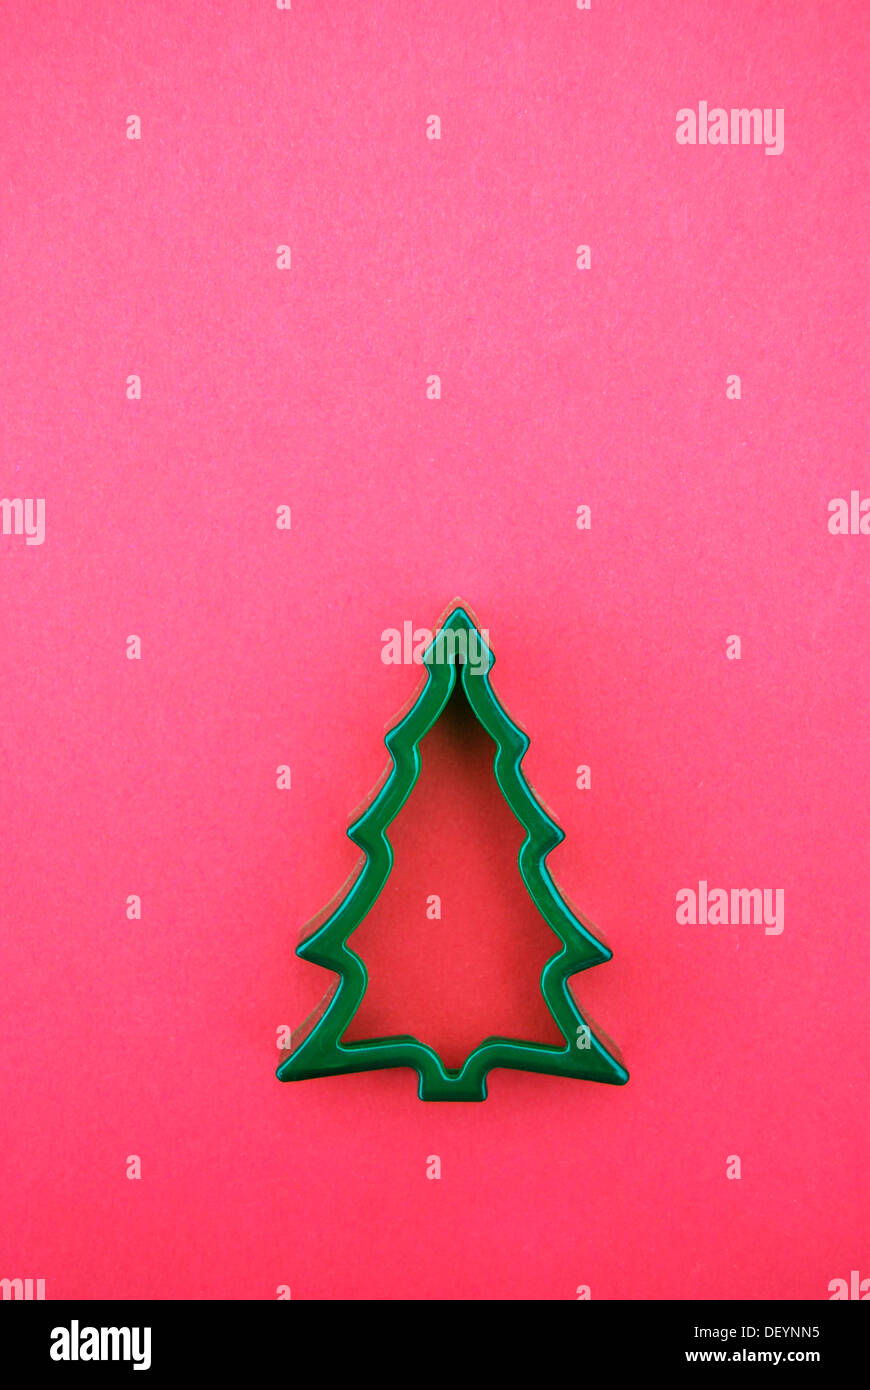 Cookie cutter, fir tree or Christmas tree Stock Photo